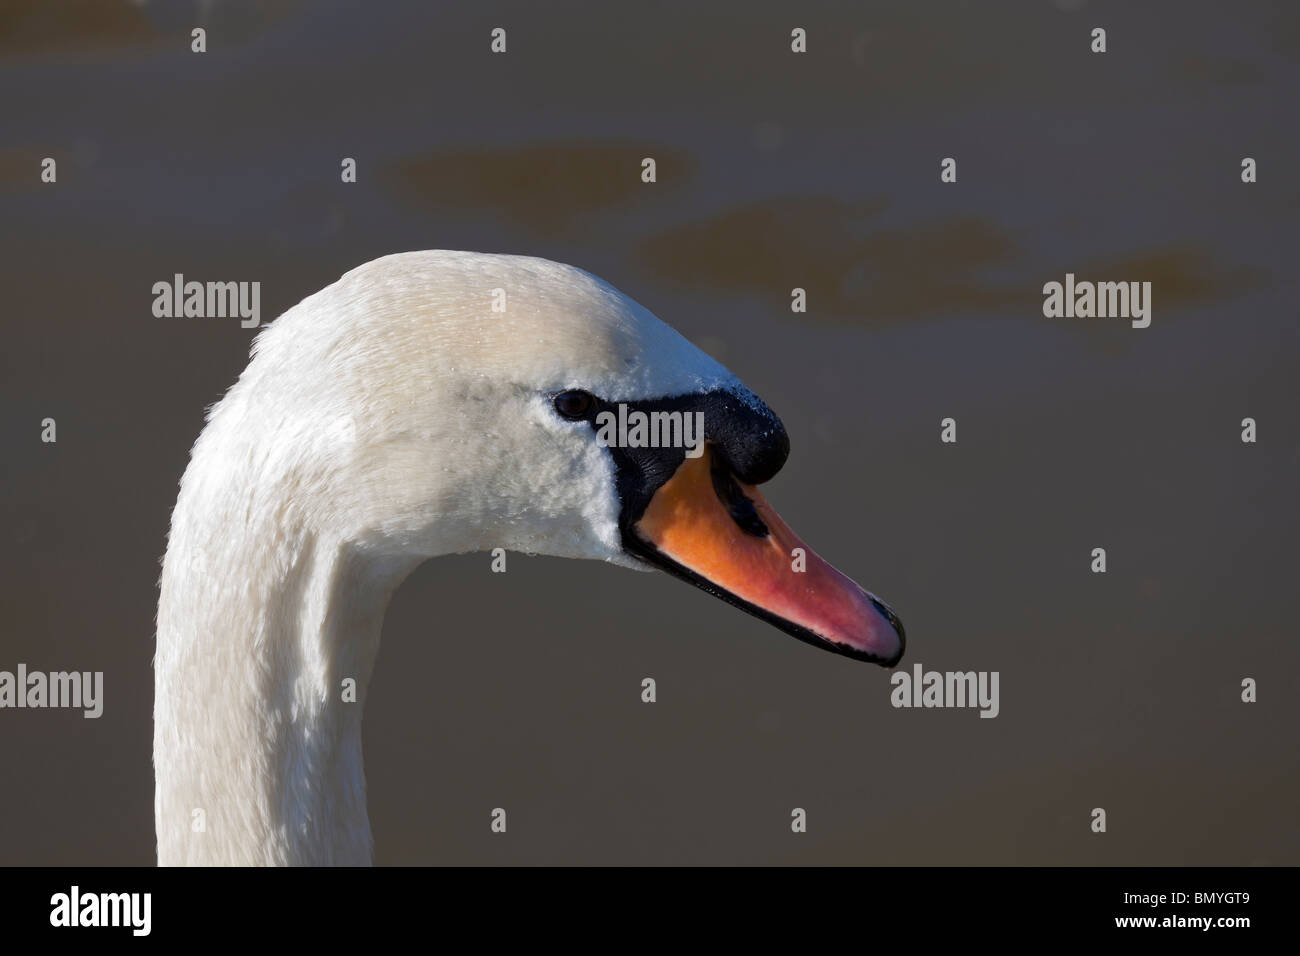 The head and neck of a Mute Swan. Stock Photo